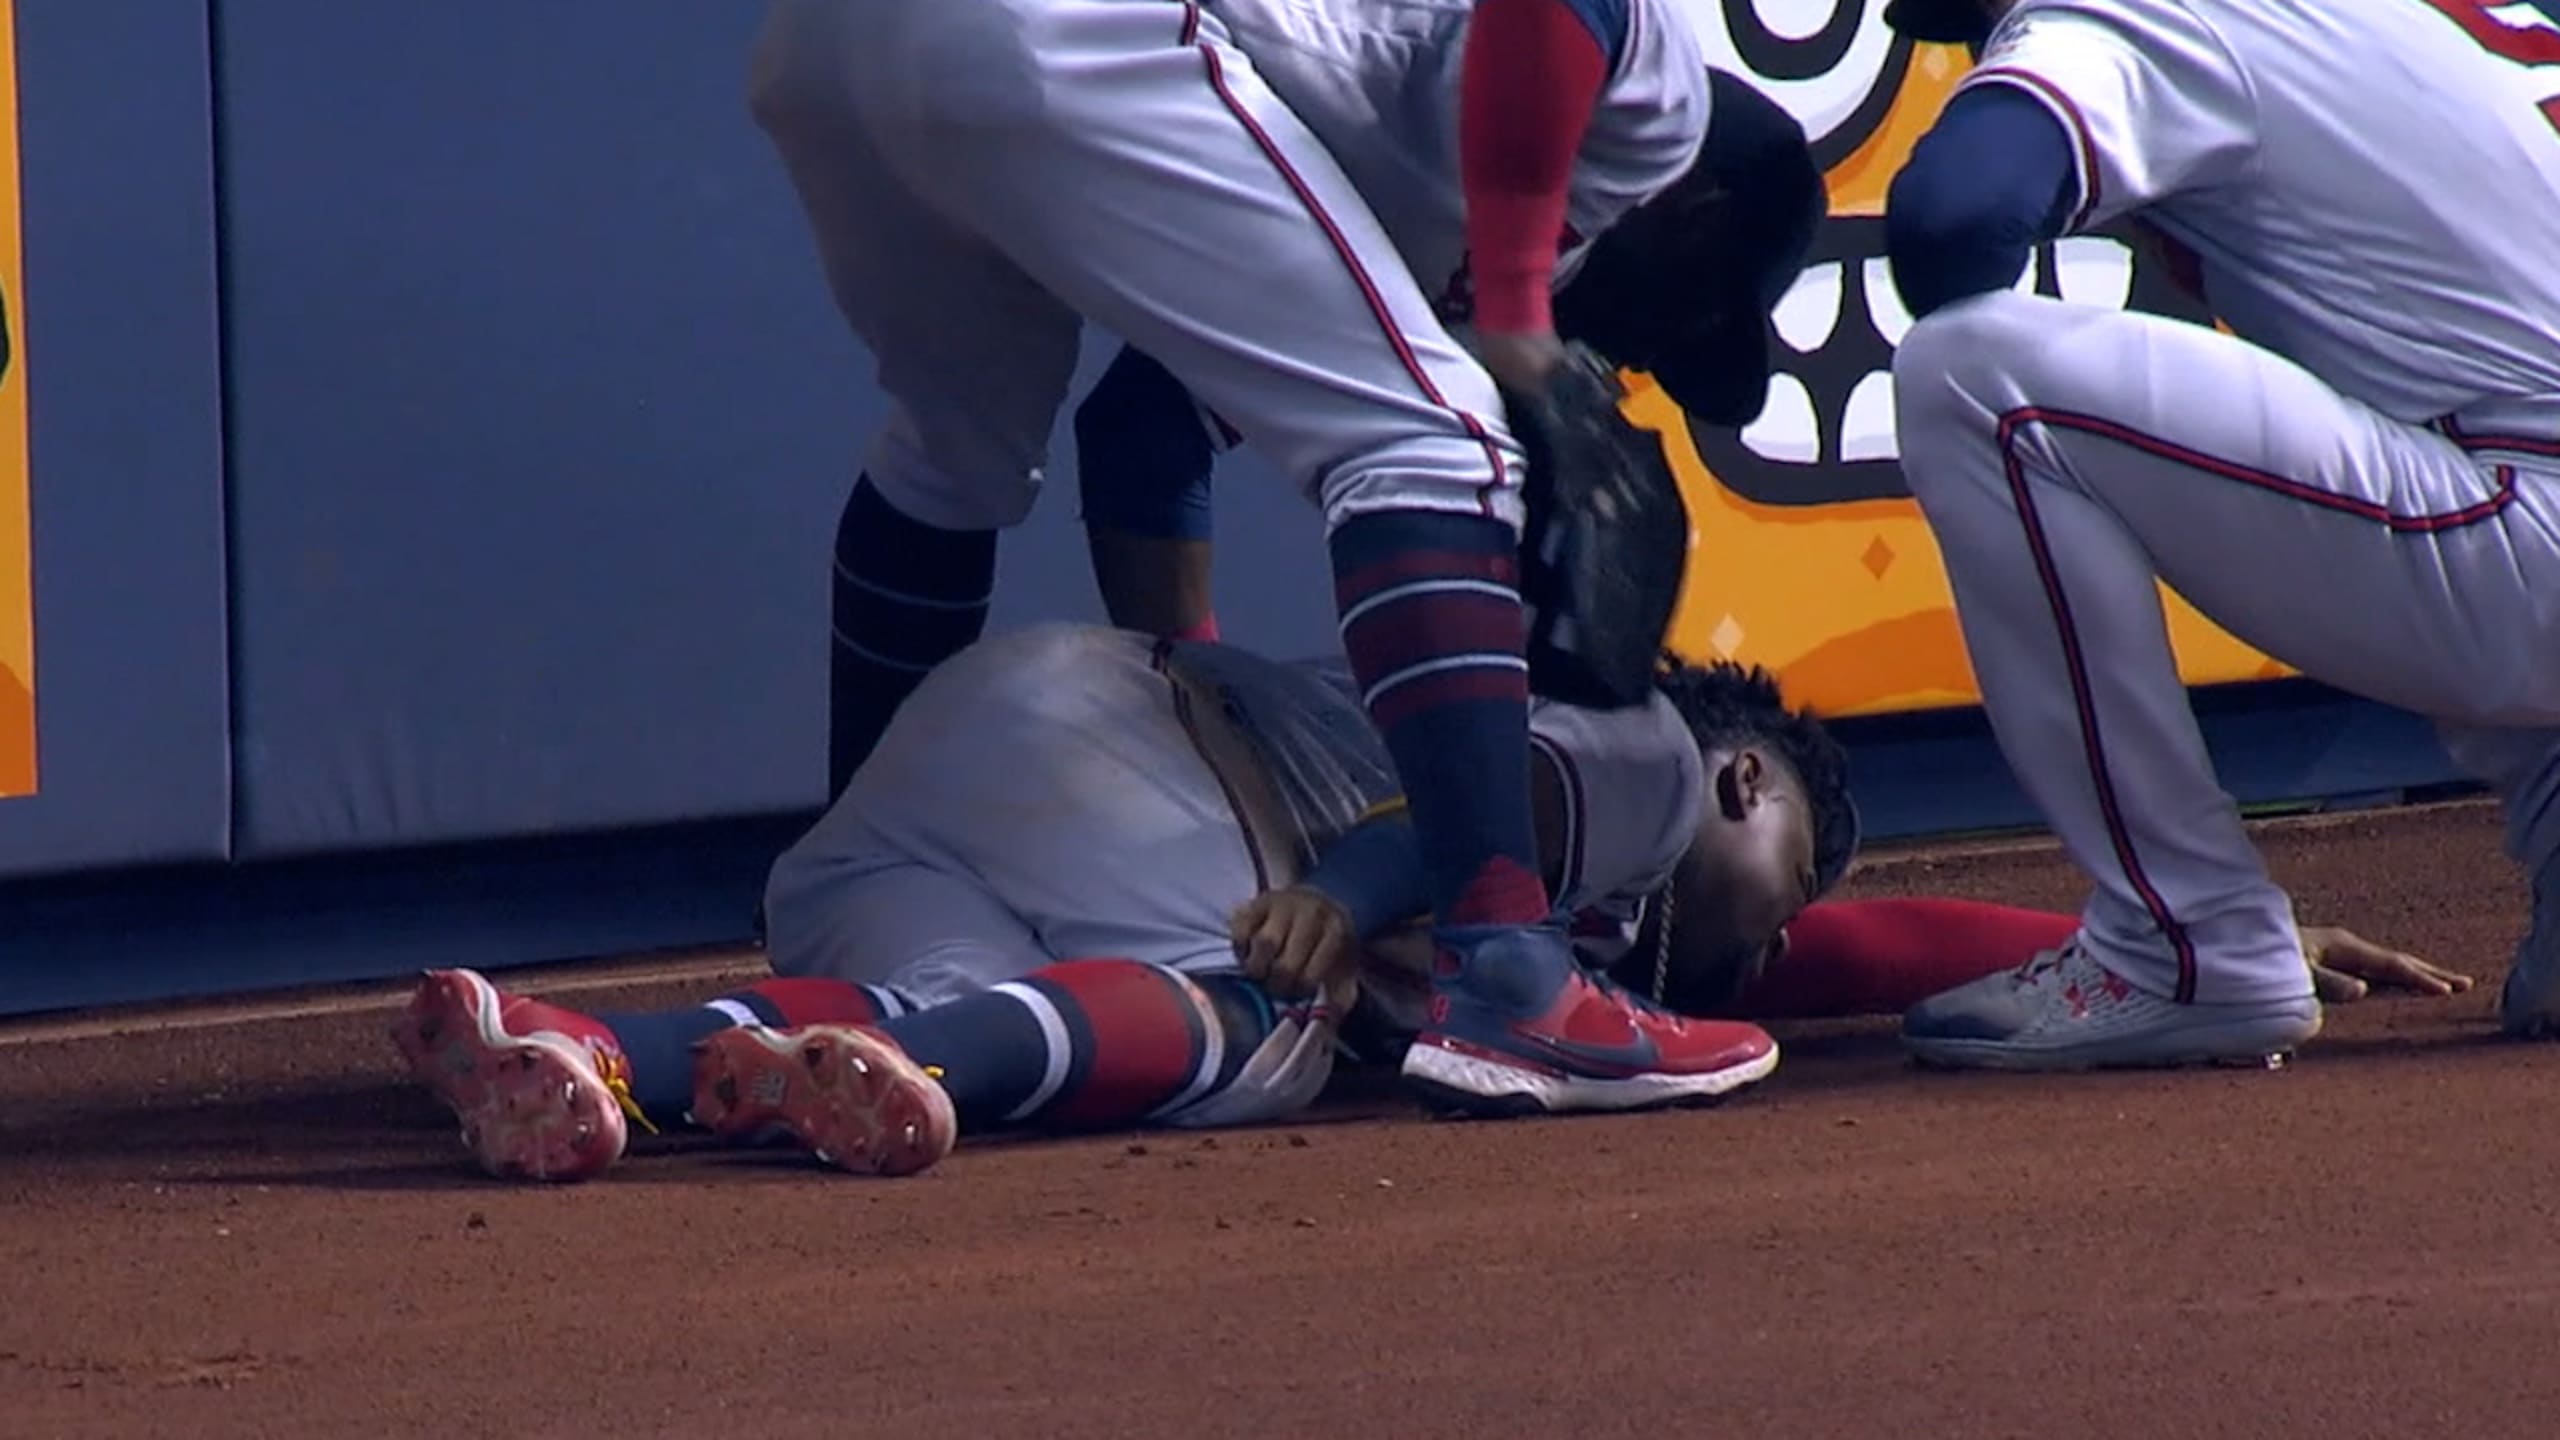 Braves star Ronald Acuña Jr. is dealing with some right knee